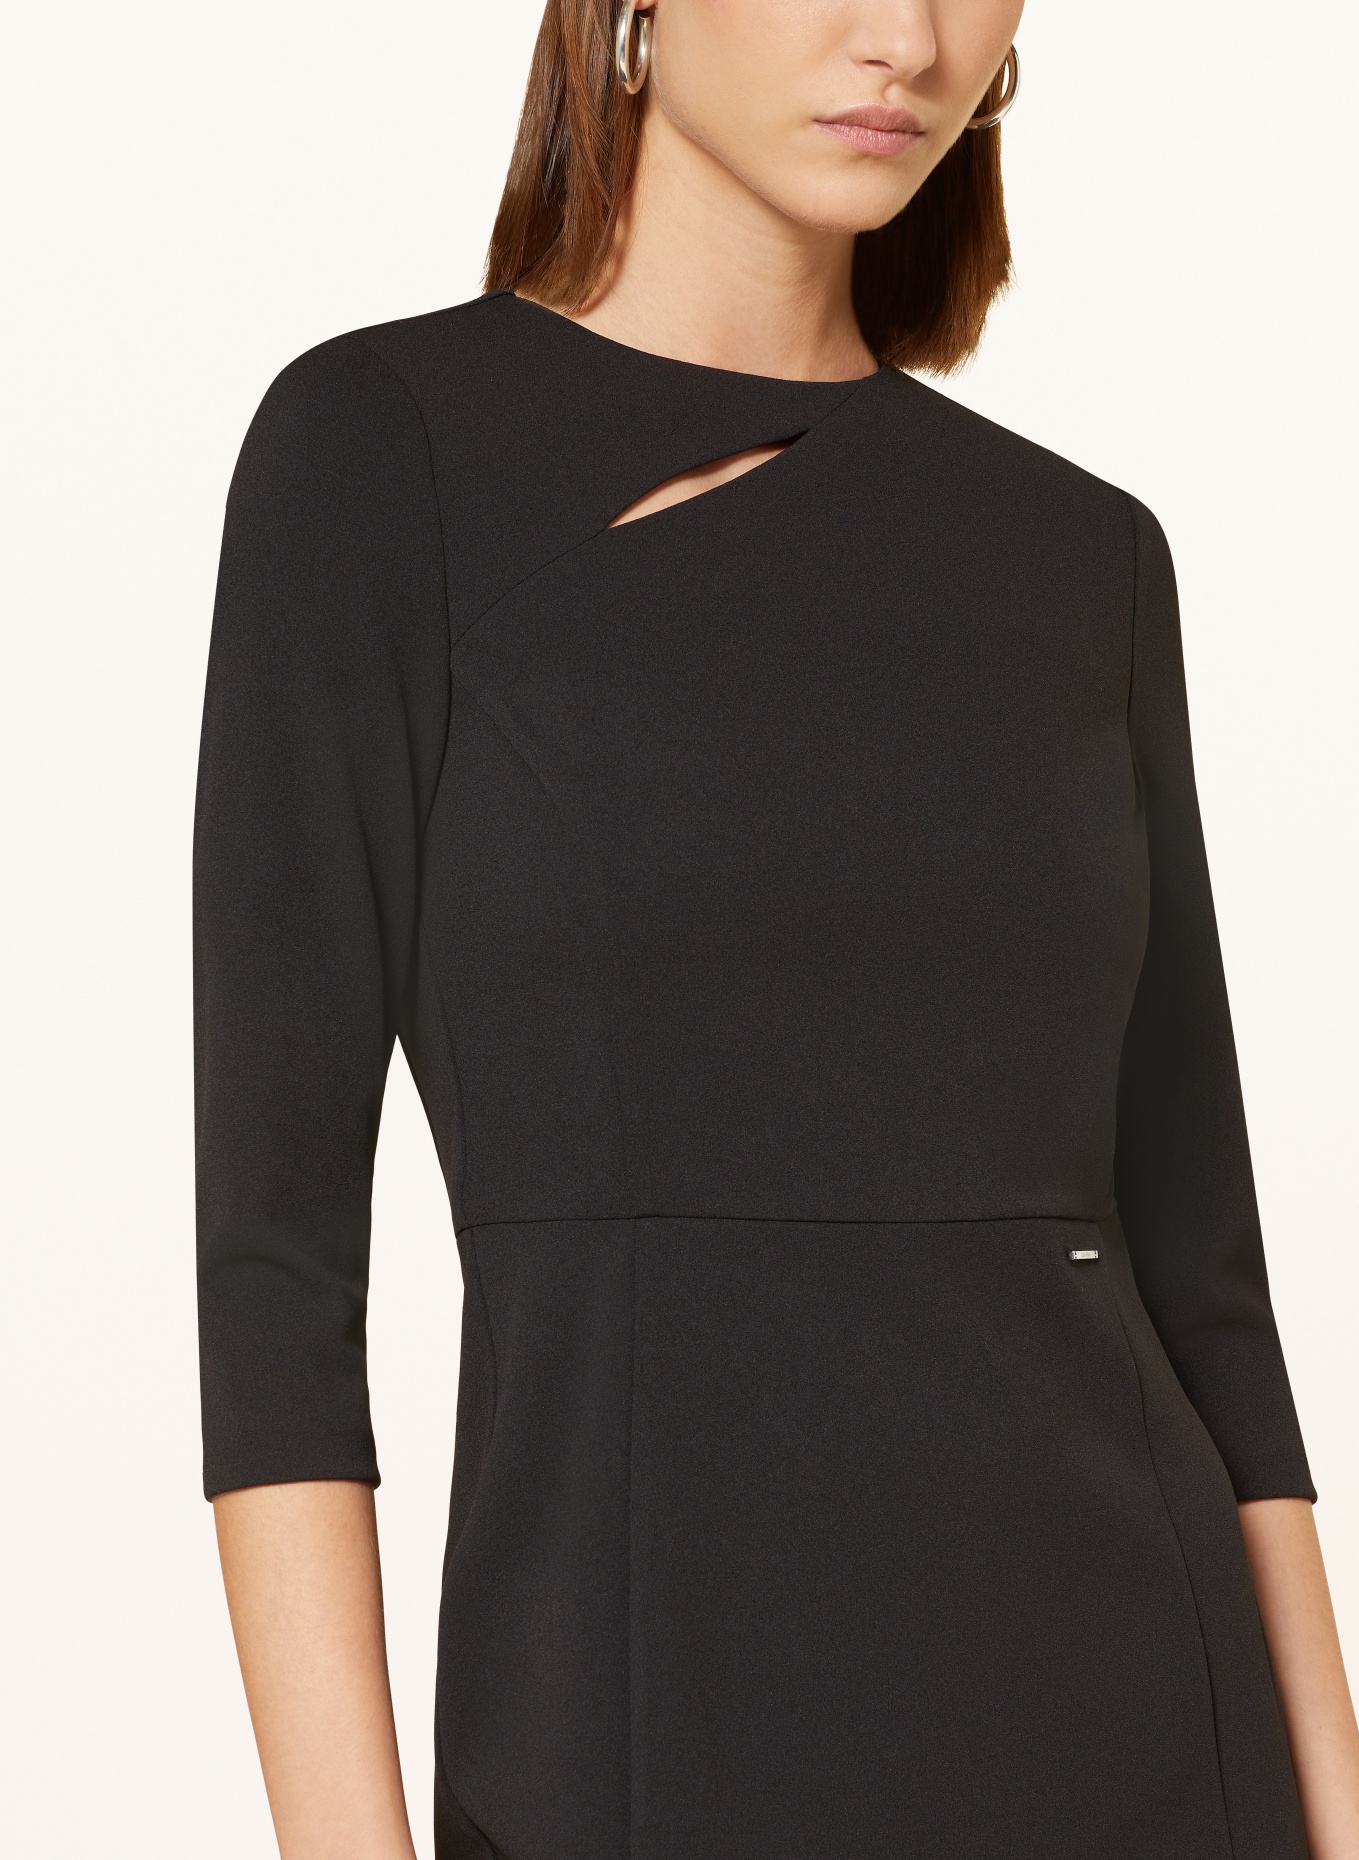 Calvin Klein Sheath dress with cut-out and 3/4 sleeves, Color: BLACK (Image 4)